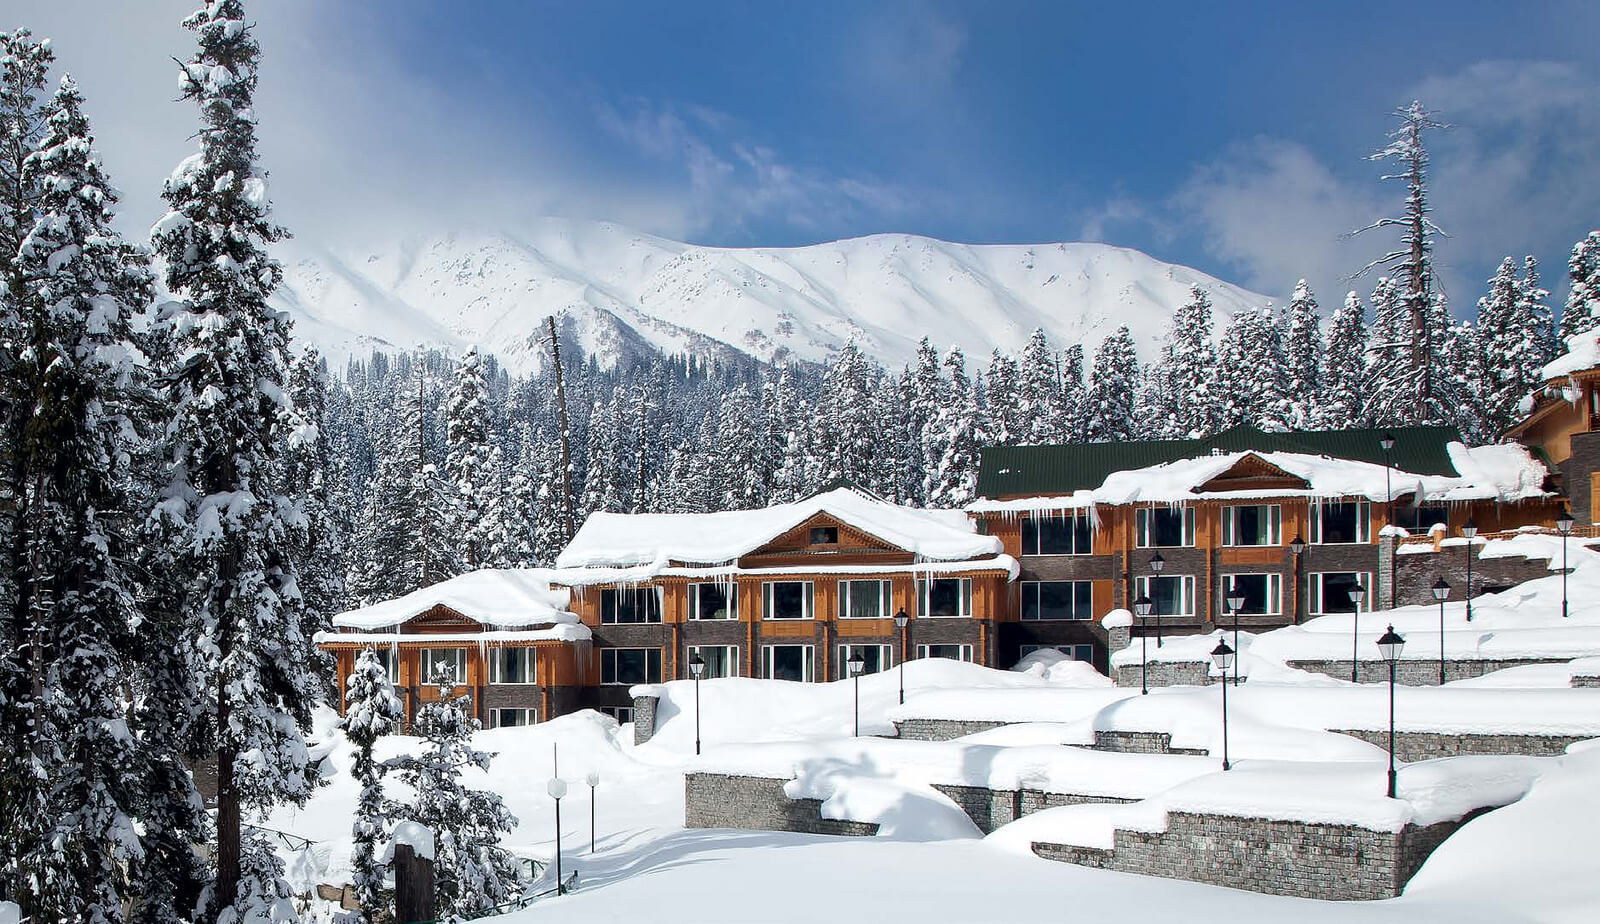 10 Best Ski Resorts In India to stay